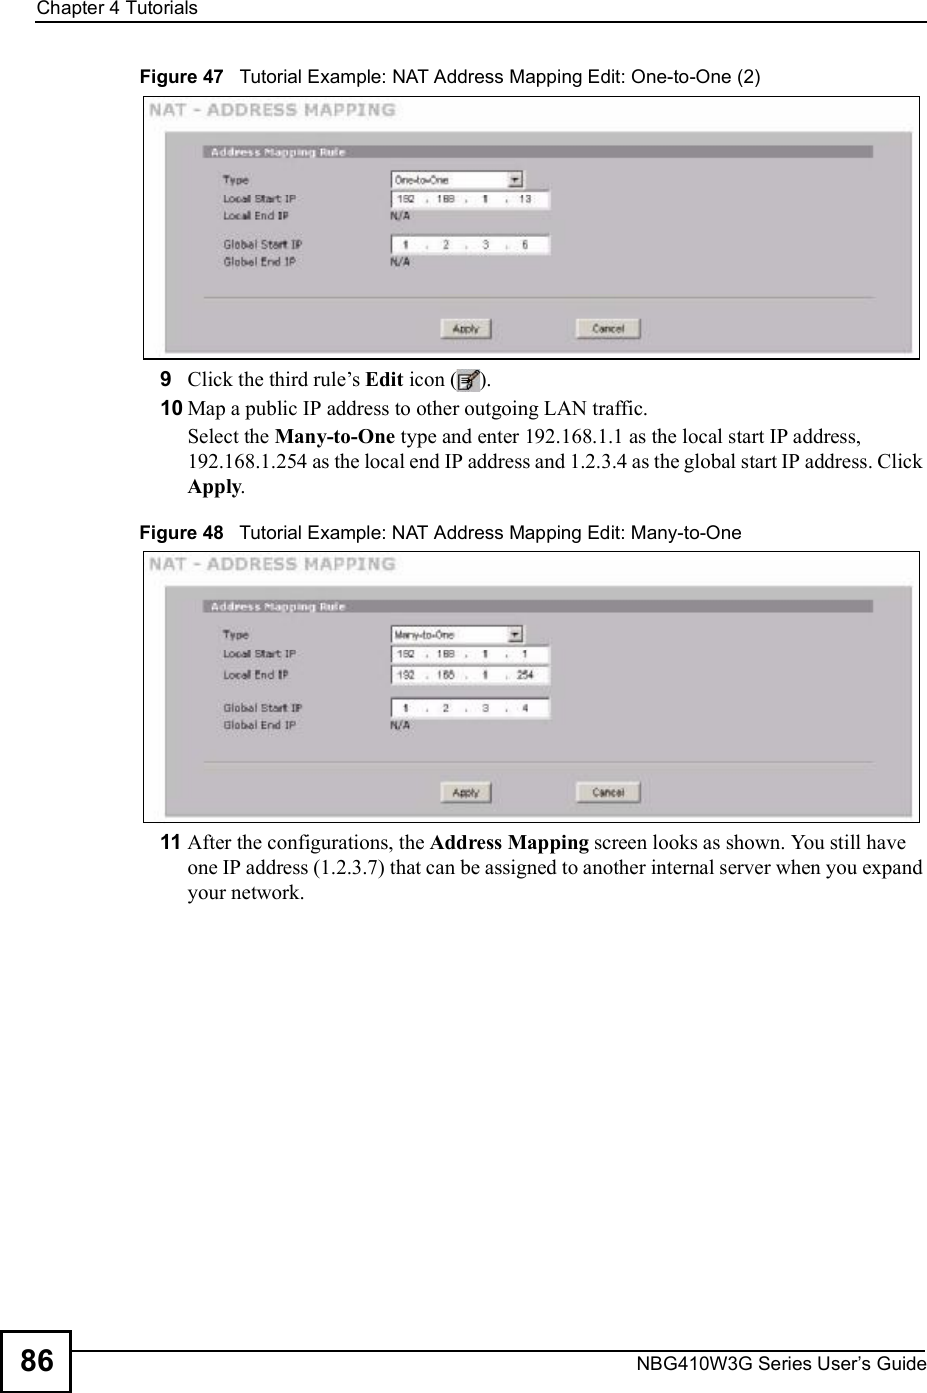 Chapter 4TutorialsNBG410W3G Series User s Guide86Figure 47   Tutorial Example: NAT Address Mapping Edit: One-to-One (2) 9Click the third rule!s Edit icon ().10 Map a public IP address to other outgoing LAN traffic.Select the Many-to-One type and enter 192.168.1.1 as the local start IP address, 192.168.1.254 as the local end IP address and 1.2.3.4 as the global start IP address. Click Apply.Figure 48   Tutorial Example: NAT Address Mapping Edit: Many-to-One 11 After the configurations, the Address Mapping screen looks as shown. You still have one IP address (1.2.3.7) that can be assigned to another internal server when you expand your network. 